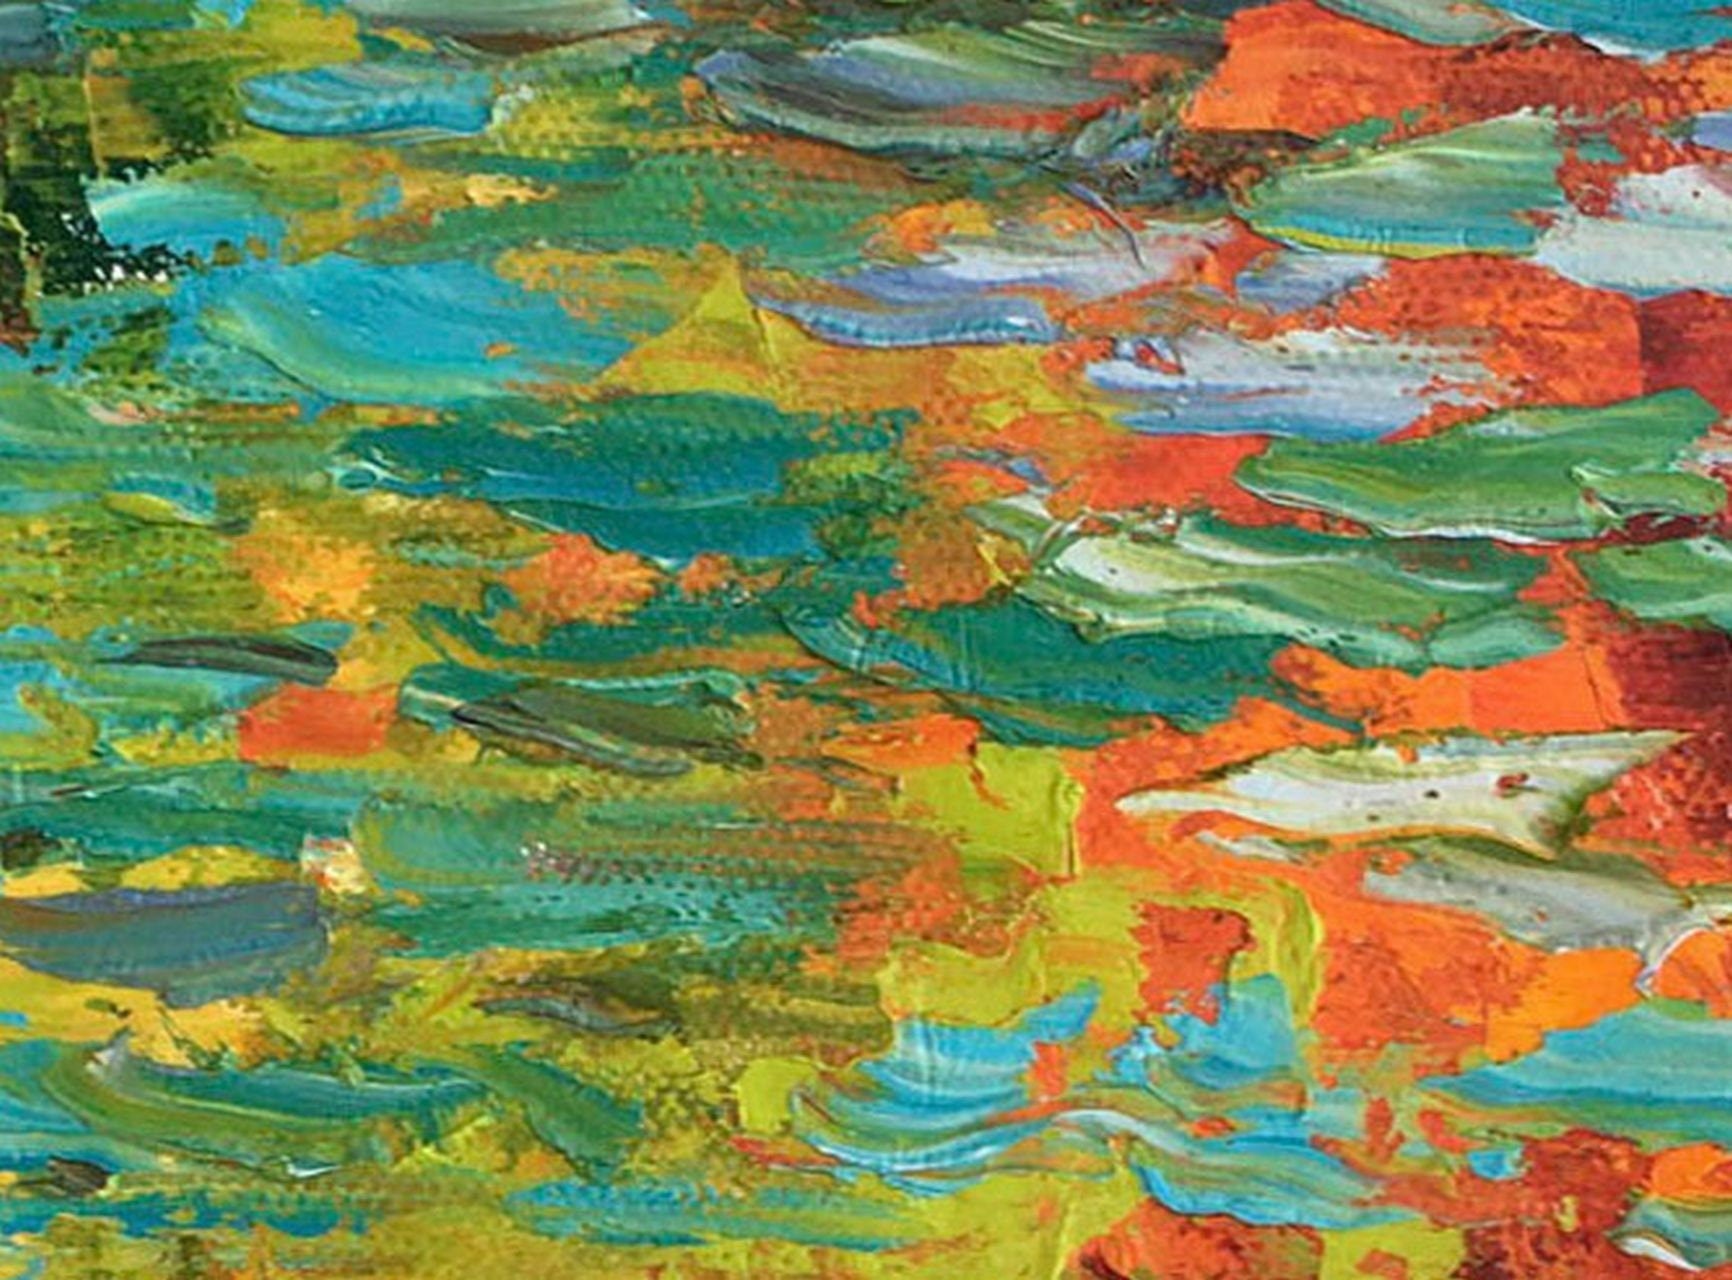 Abstract Canvas Painting, Landscape Painting, Waterlilies, Abstract Oil Painting, Oil Painting Original, Spring Landscape Painting